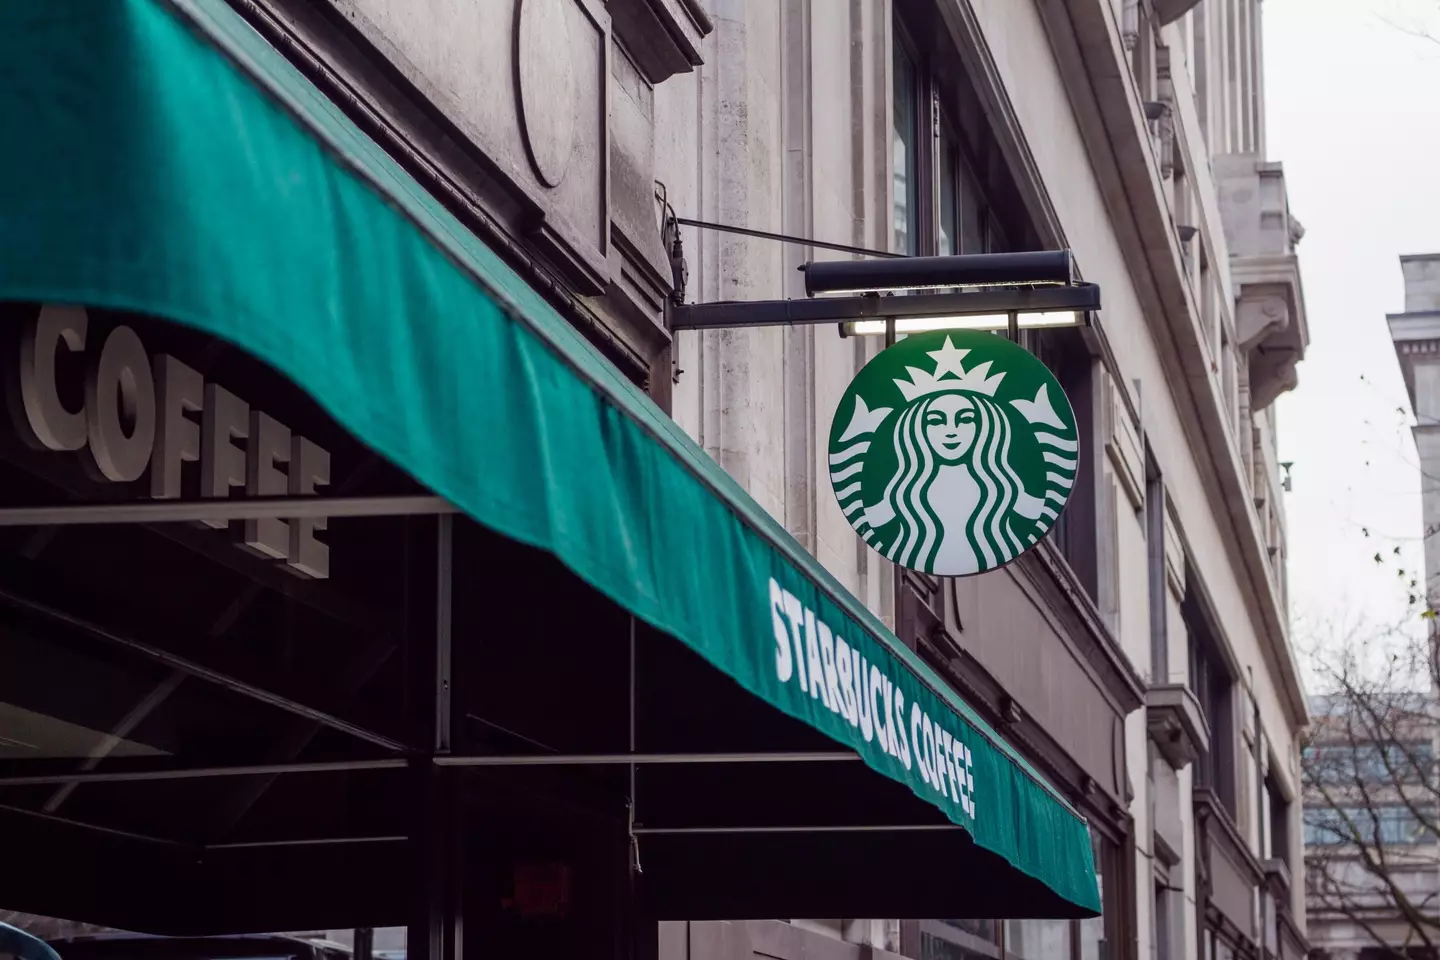 Starbucks has been found to have the lowest levels of caffeine in their coffee.